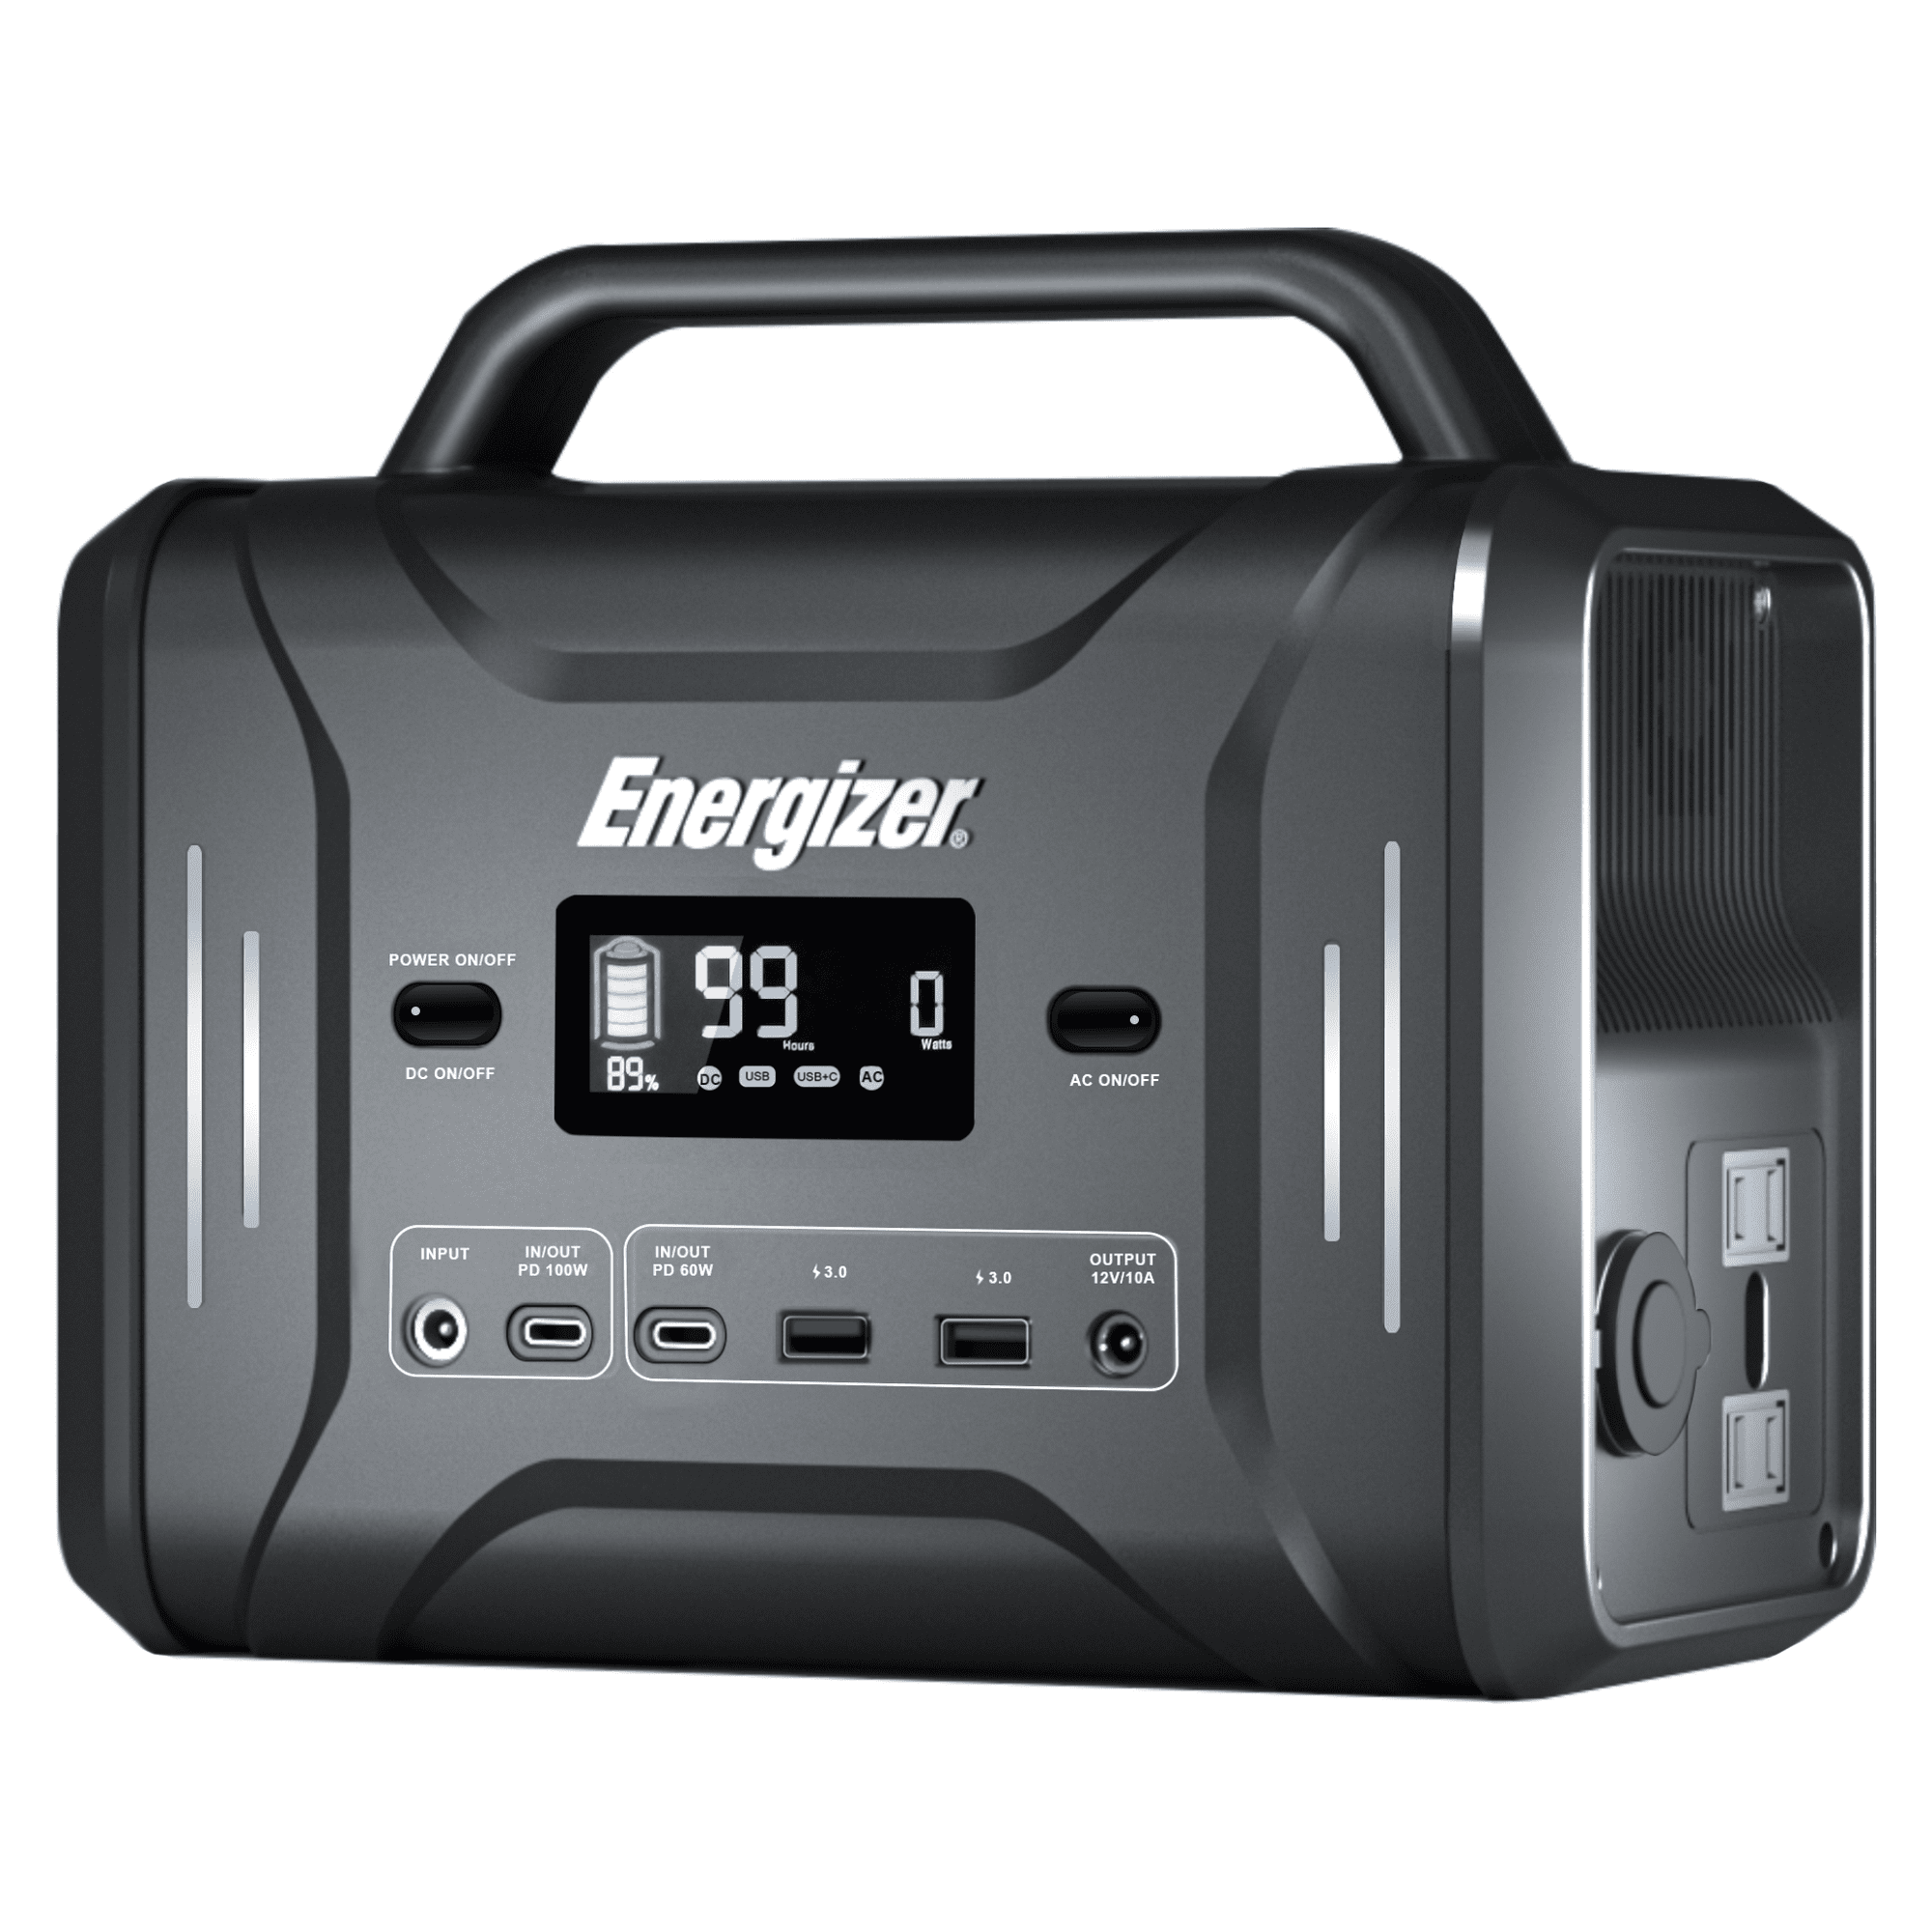 Energizer 320Wh Portable Power Station 100000mAh LiFePO4 Batteries Solar Generator Sine Wave 300W Peak 600W Backup Power for Outdoors Camping Travel